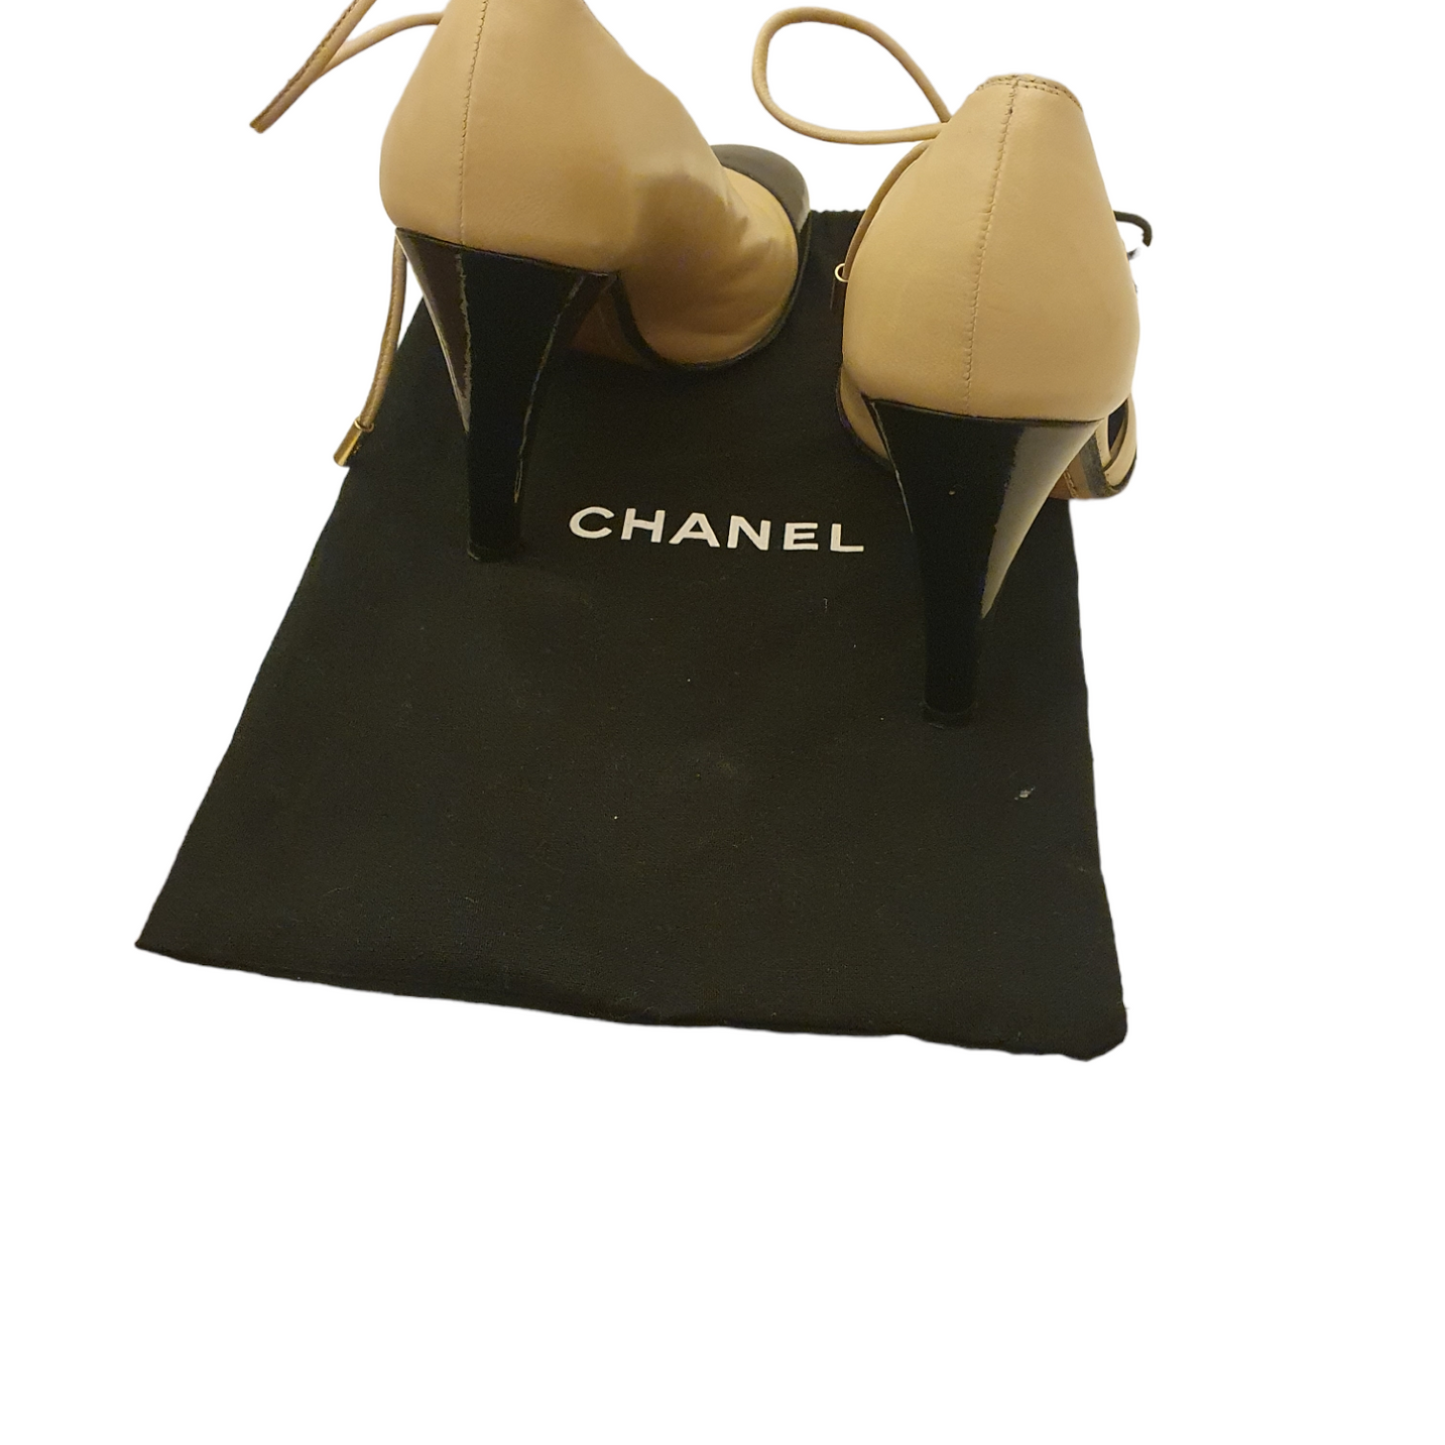 Chanel Black and cream heeled shoes, size 4/37